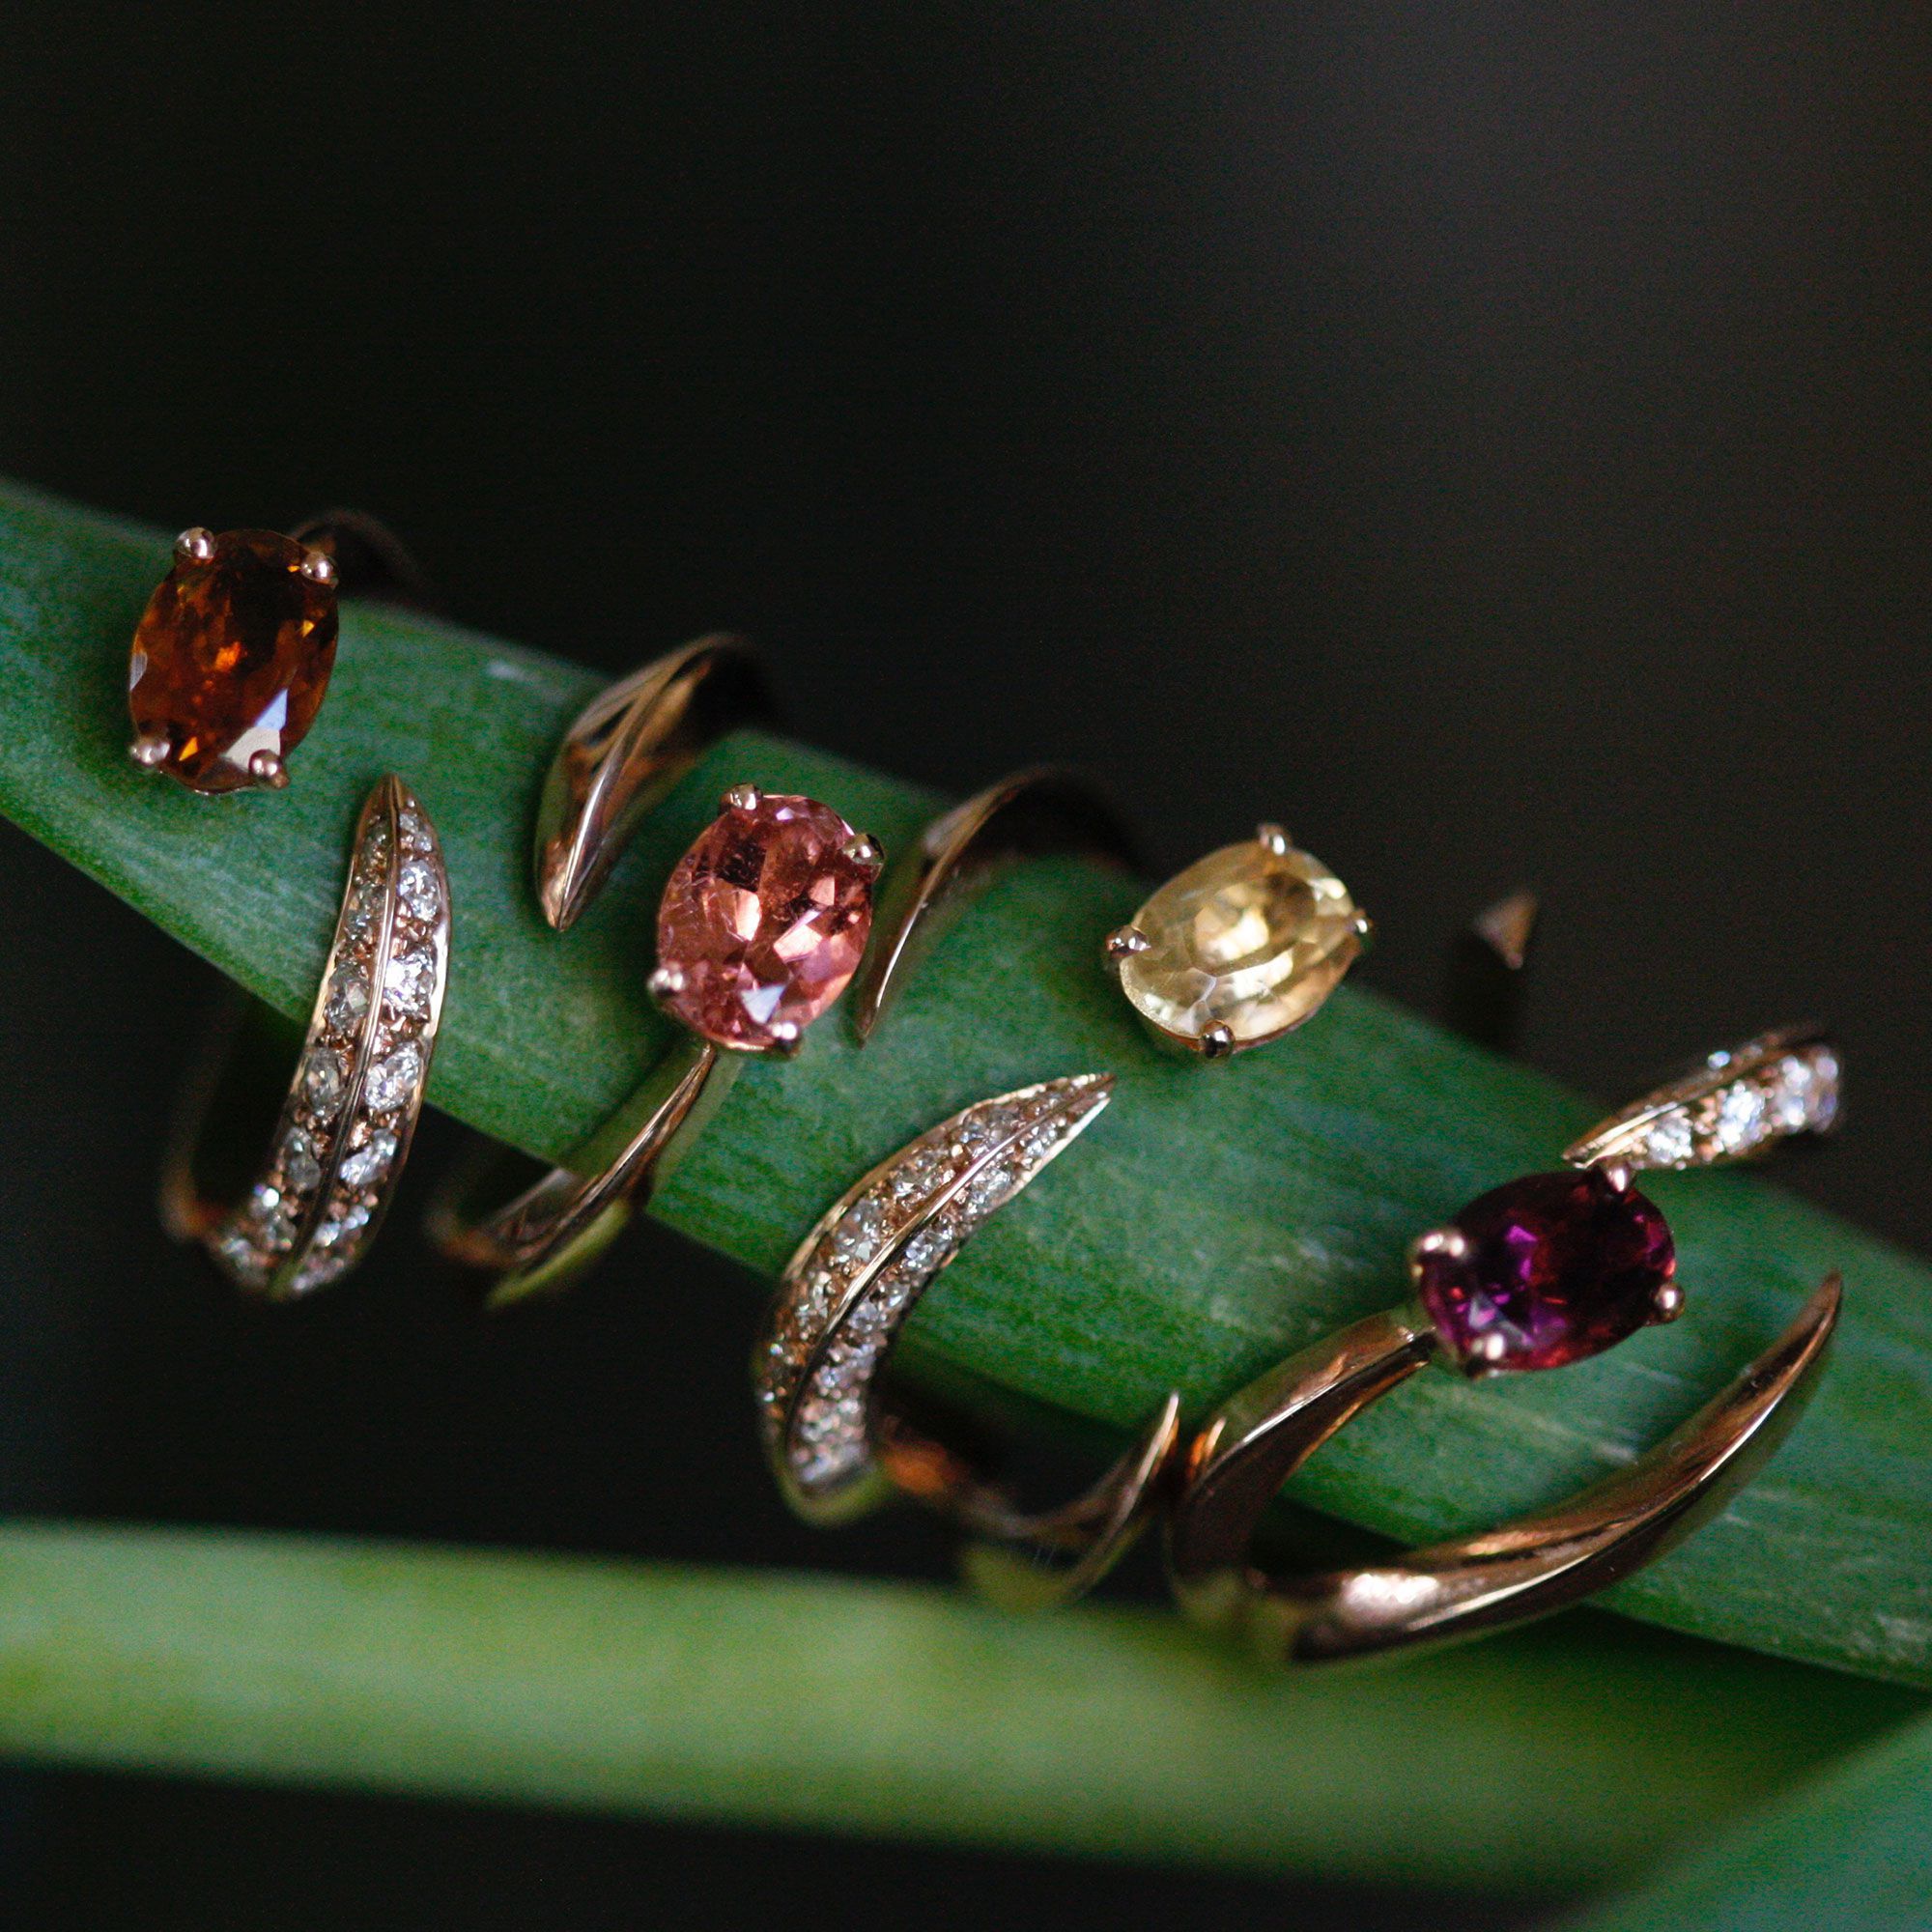 Four elements 'Solis' ring in rose gold with tourmaline SOLIS | AN4 1TORM PVAU9R VD CT.0,60 + 0,30